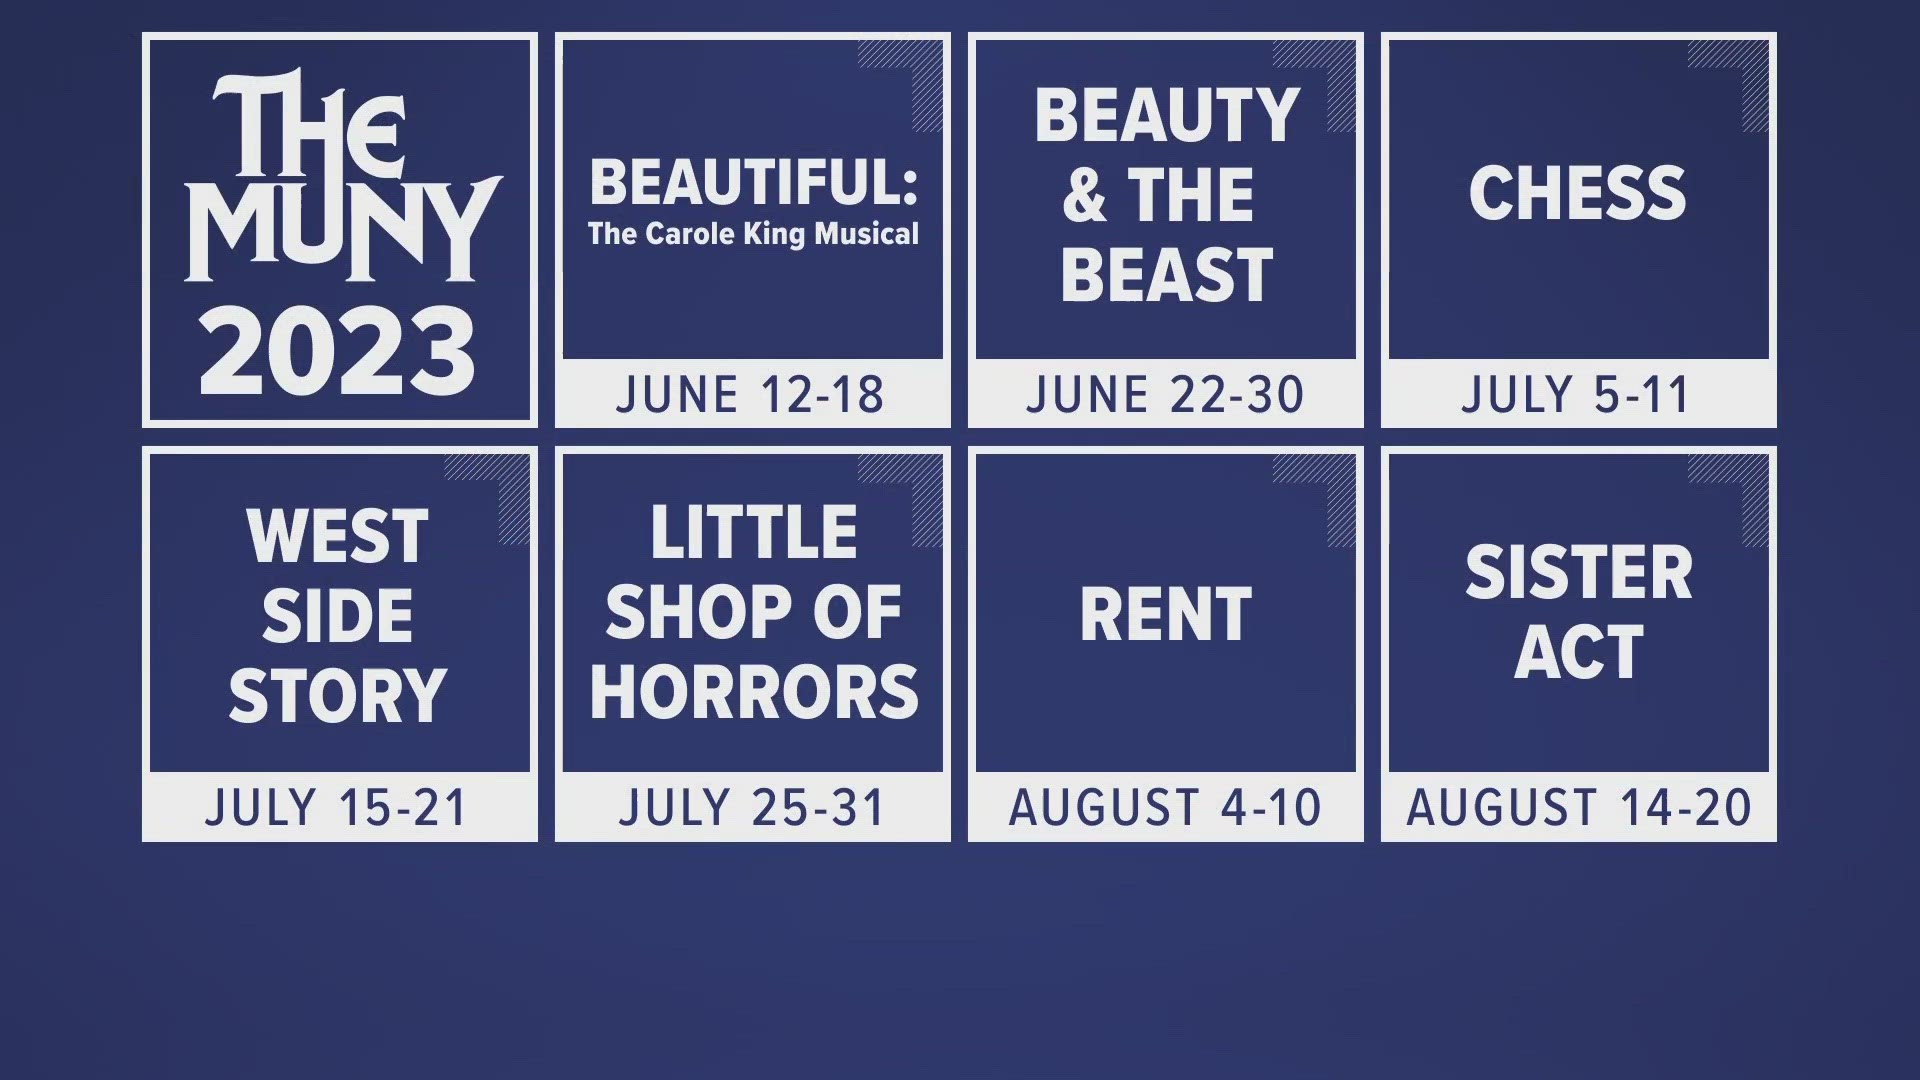 Season tickets go on sale at 9 a.m. Monday and start at $112. Here are some of the shows coming this season to the Muny.